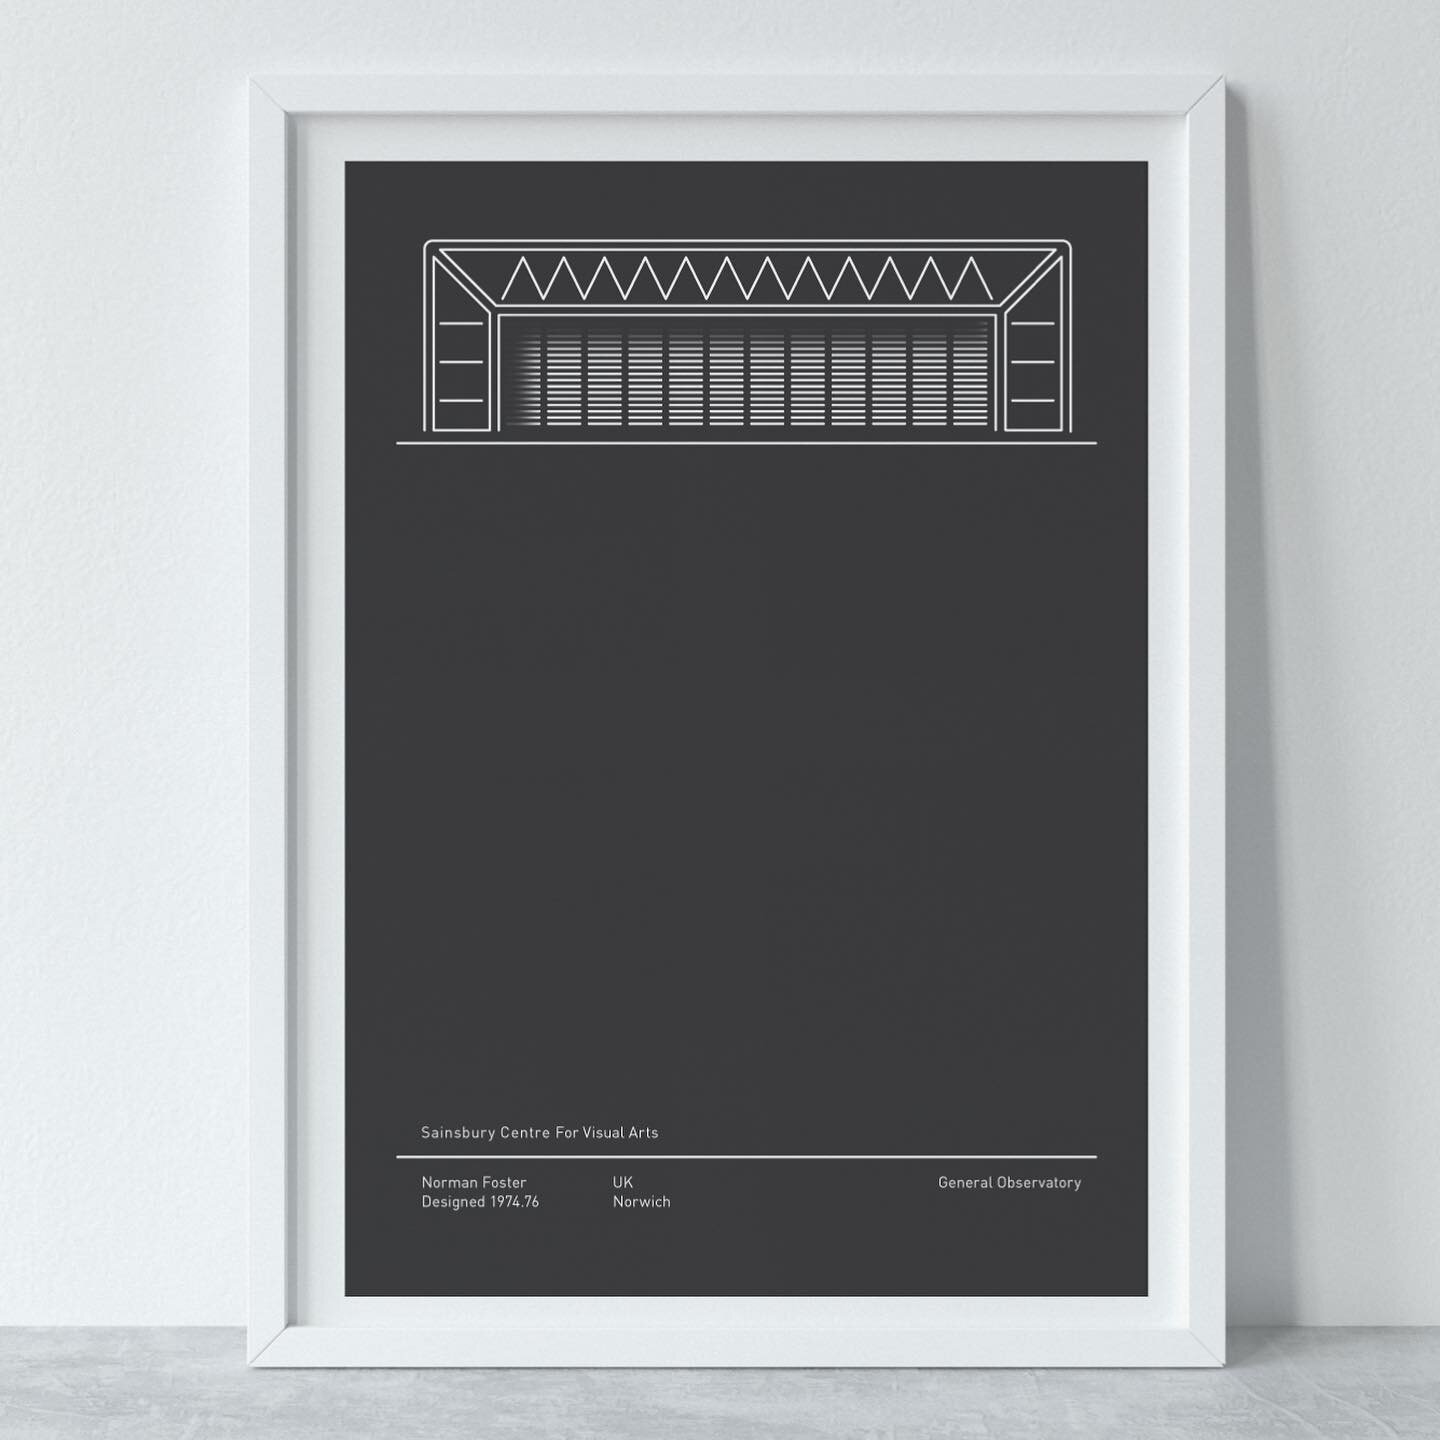 Sainsbury Centre always has a calming effect - perhaps that&rsquo;s why the Avengers train there!
Homage to our favourite Norwich building and Norman Foster. 

Printed A3 on 190gsm matte stock
Shop @generalobservatory 
.
.
.
.
.
.
#architectart #arch